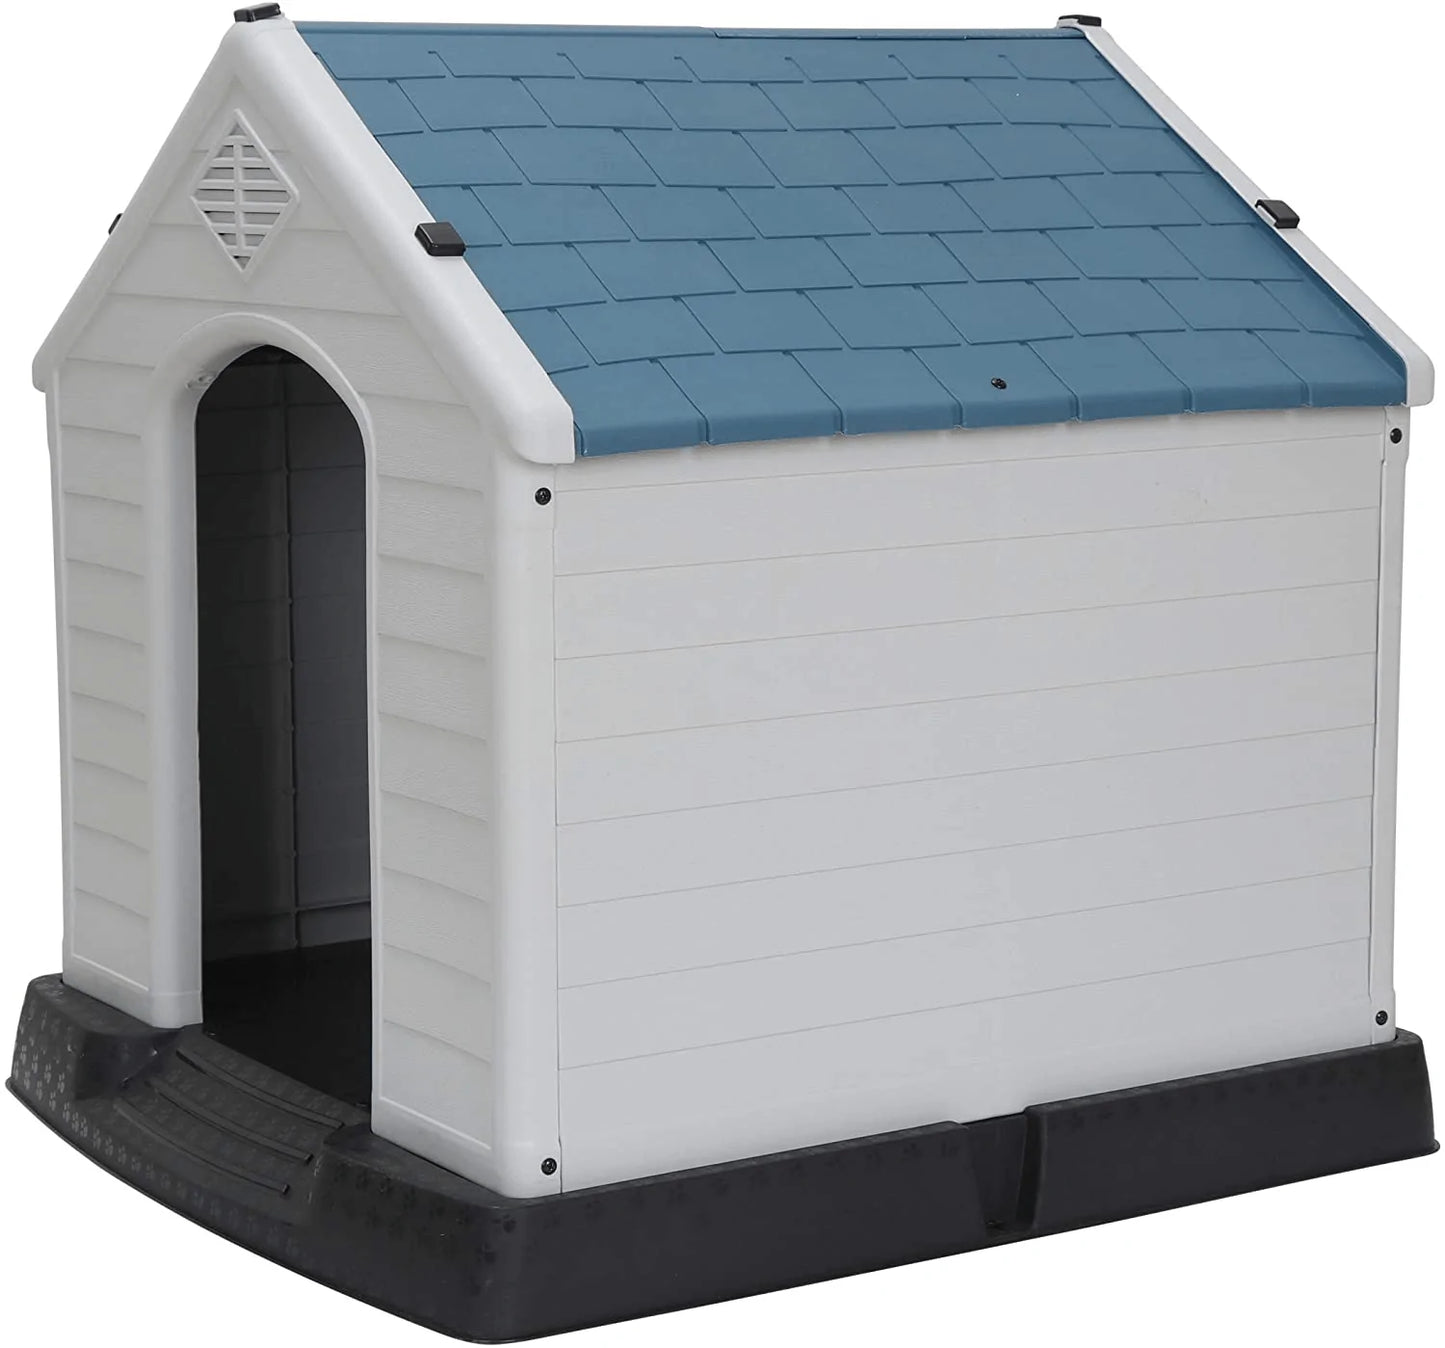 ZENY Plastic Dog House - Water Resistant Dog Kennel for Small to Medium Sized Dogs All Weather Indoor Outdoor Doghouse Puppy Shelter